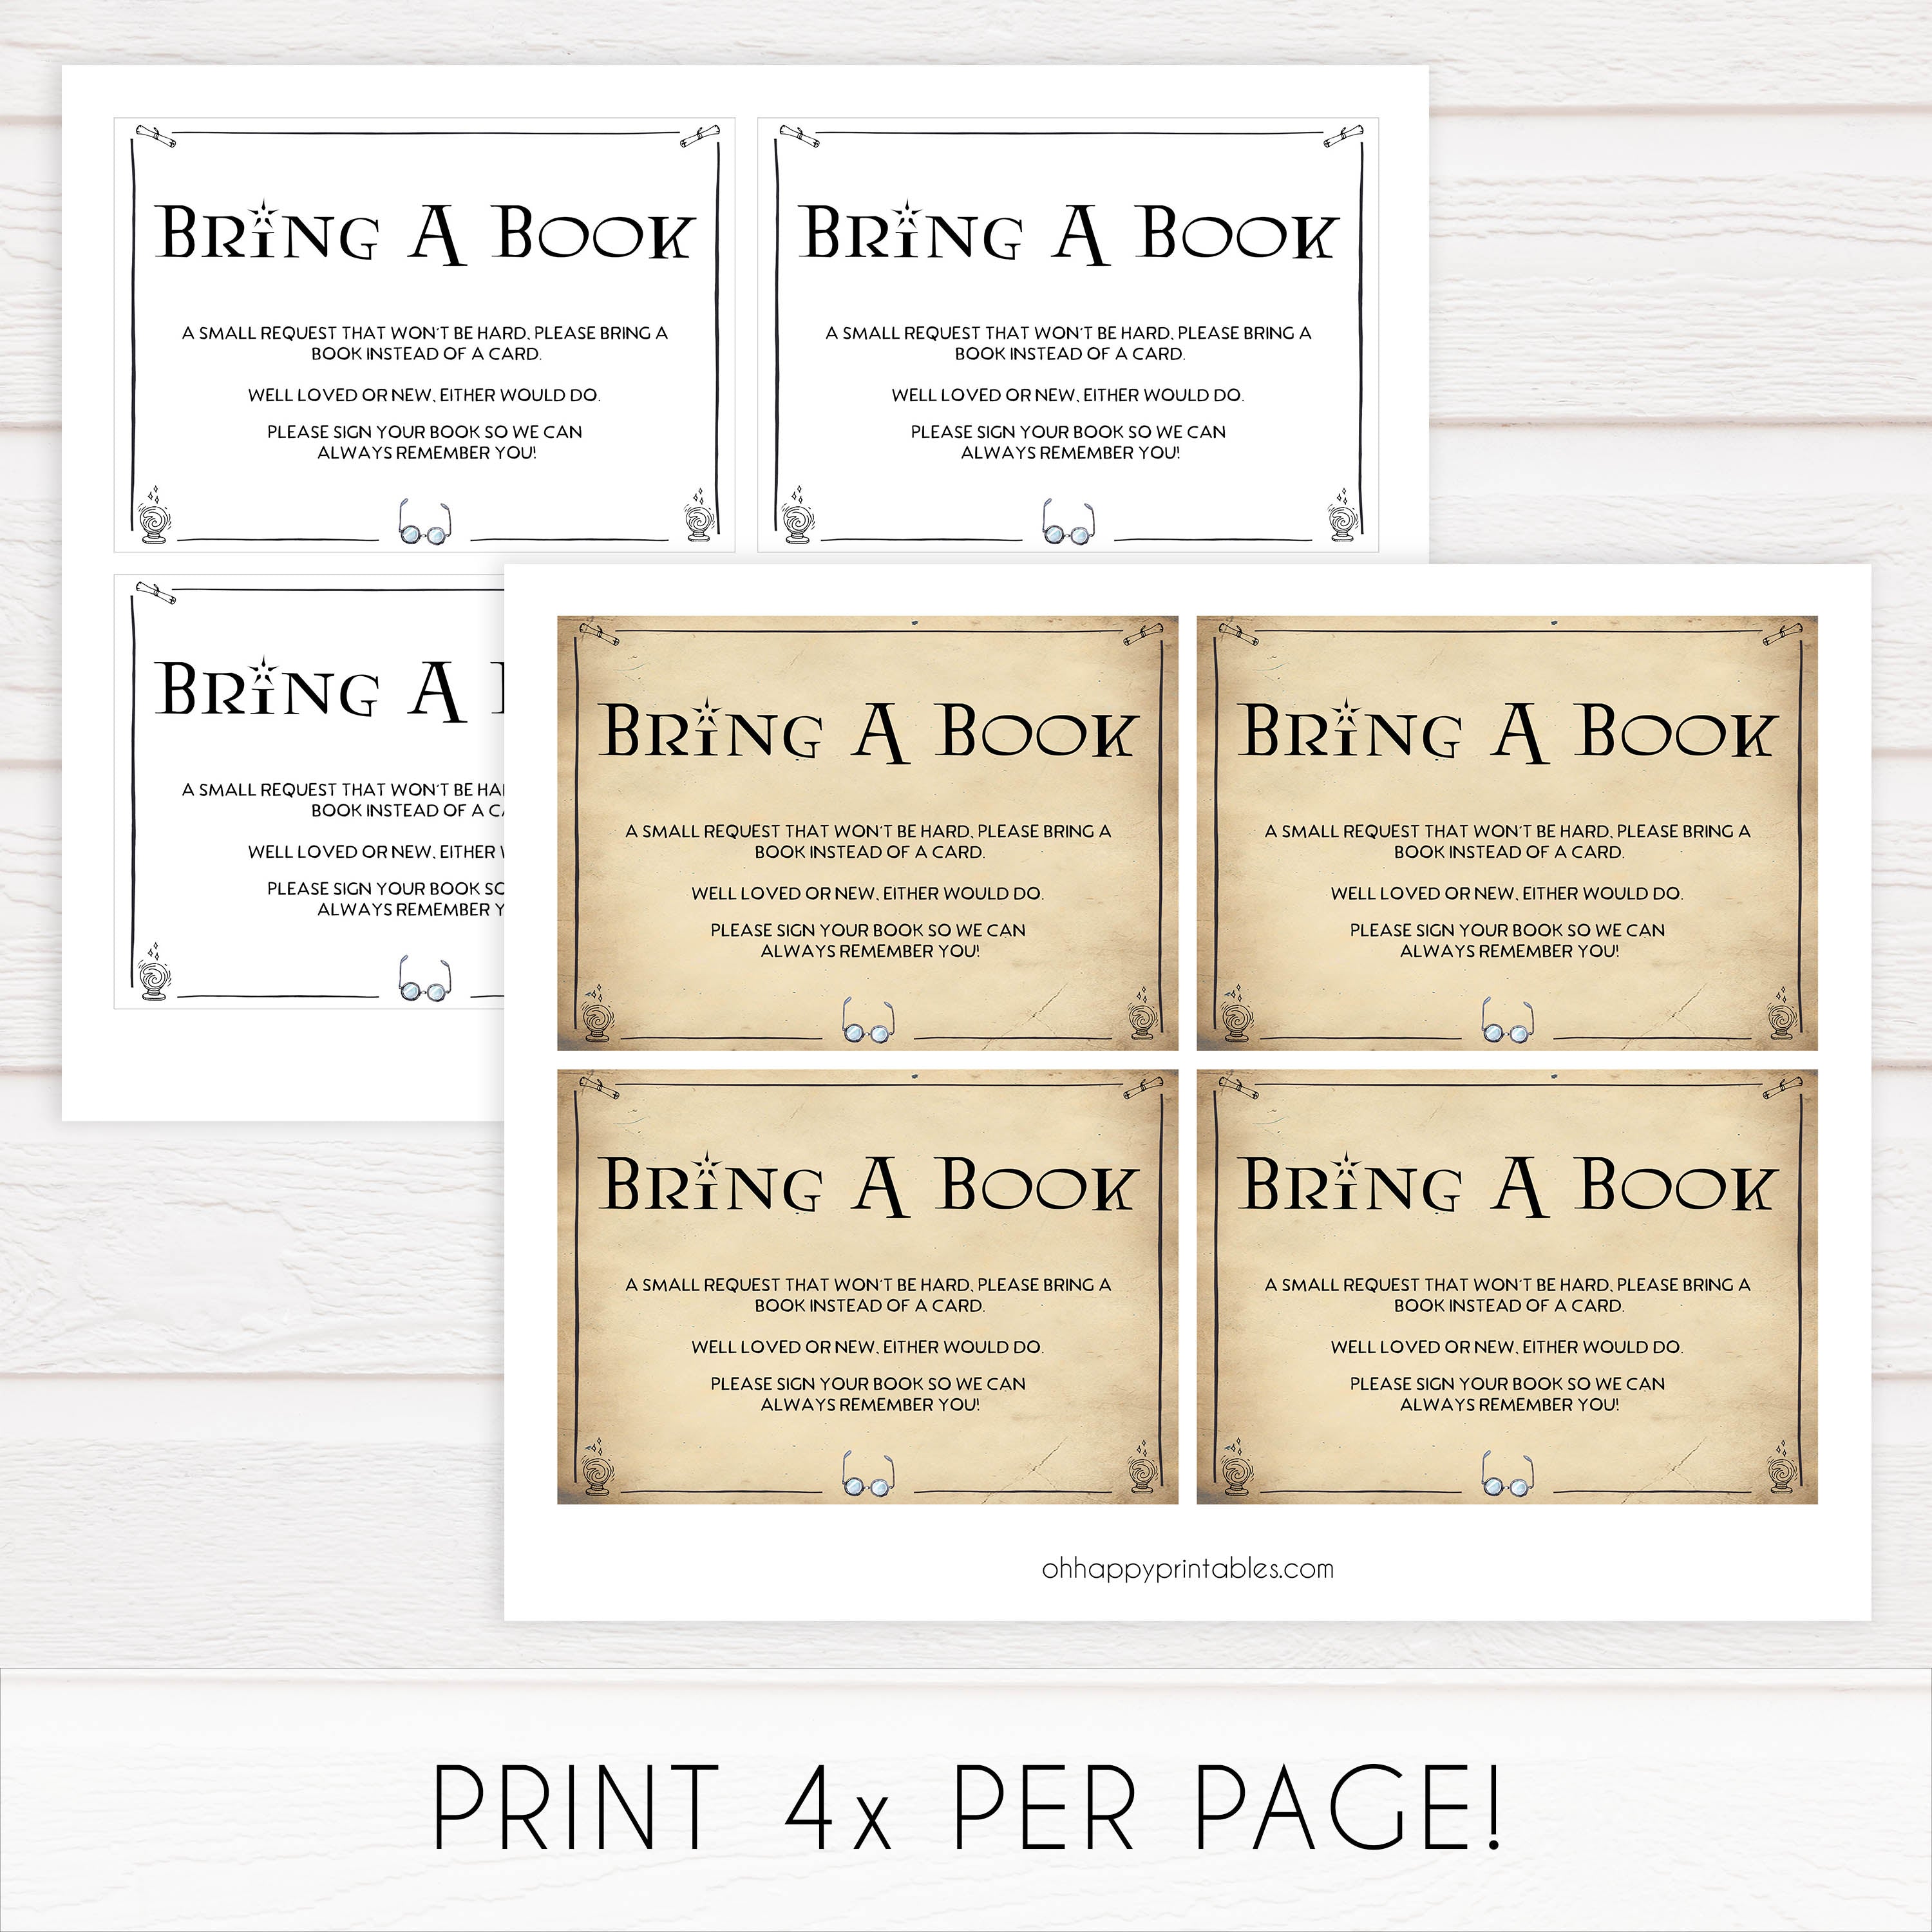 Harry Potter Don't Say Baby Game  Harry potter baby shower, Harry potter  baby shower games, Printable baby shower games